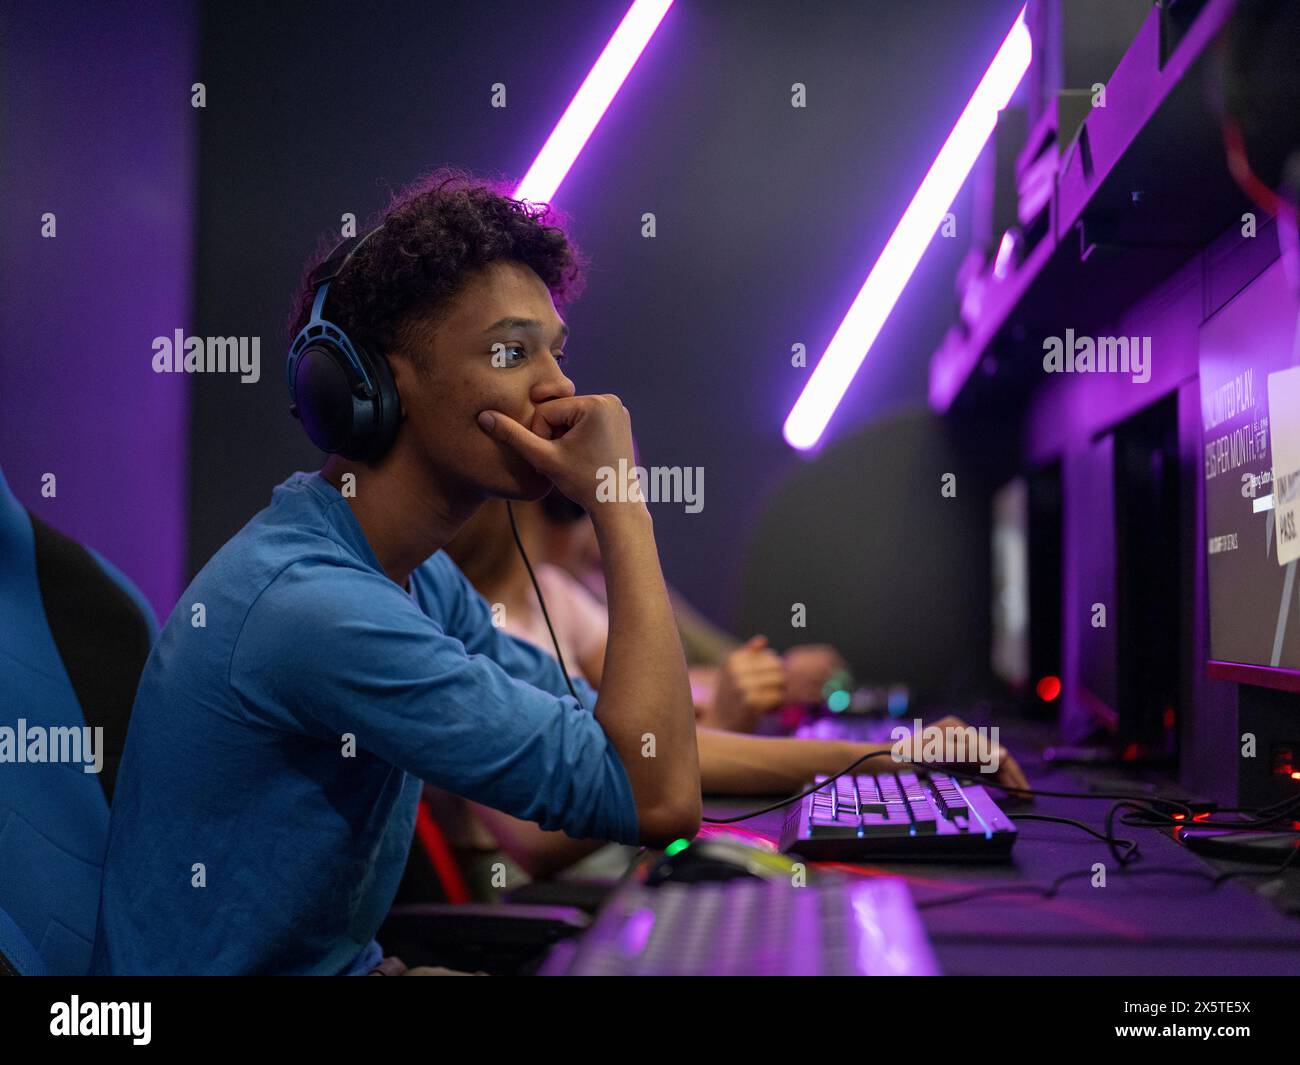 Young man playing video games in gaming club Stock Photo